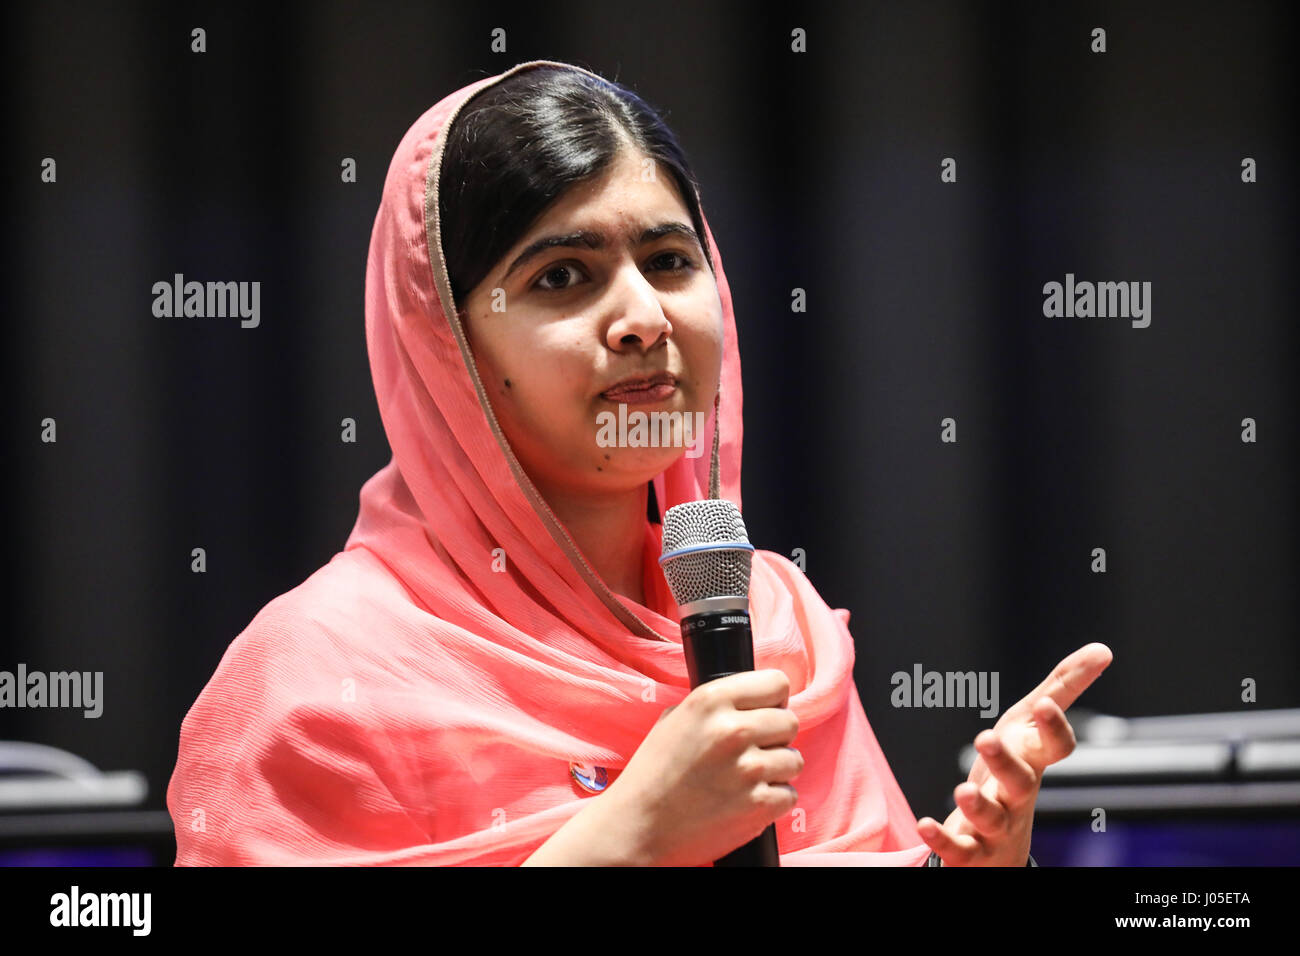 New York, United States. 10th Apr, 2017. Activist Malala Yousafzai, accompanied by Portugal's António Guterres, secretary general of the United Nations (UN) during her appointment as United Nations peace message with a special focus on girls' education event at United Nations Headquarters in New York on the afternoon of Monday, 10. The function is the highest honor bestowed by an organization leader to a citizen of the world.  Stock Photo